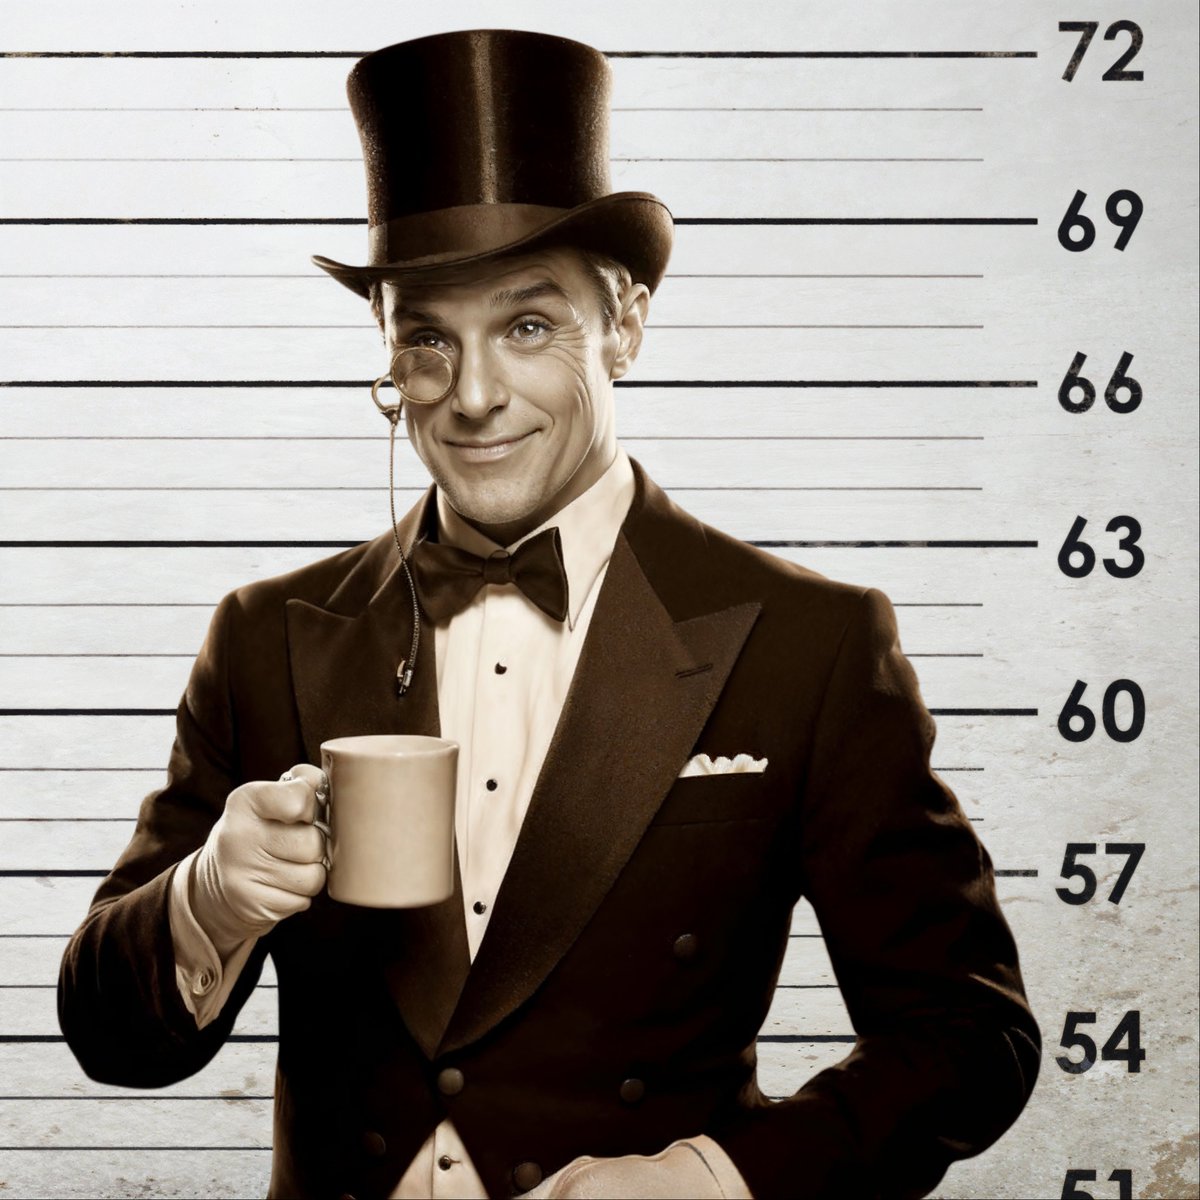 ☕️ MUG SHOTS ☕️

Sir Reginald Featherstone, a quintessential British toff with a top hat,  monocle, and tuxedo, needed his morning coffee but couldn't be bothered  with the commoners' queue. When his attempt to bribe the barista  failed, ⤵️

#FlashFiction #WritingCommunity